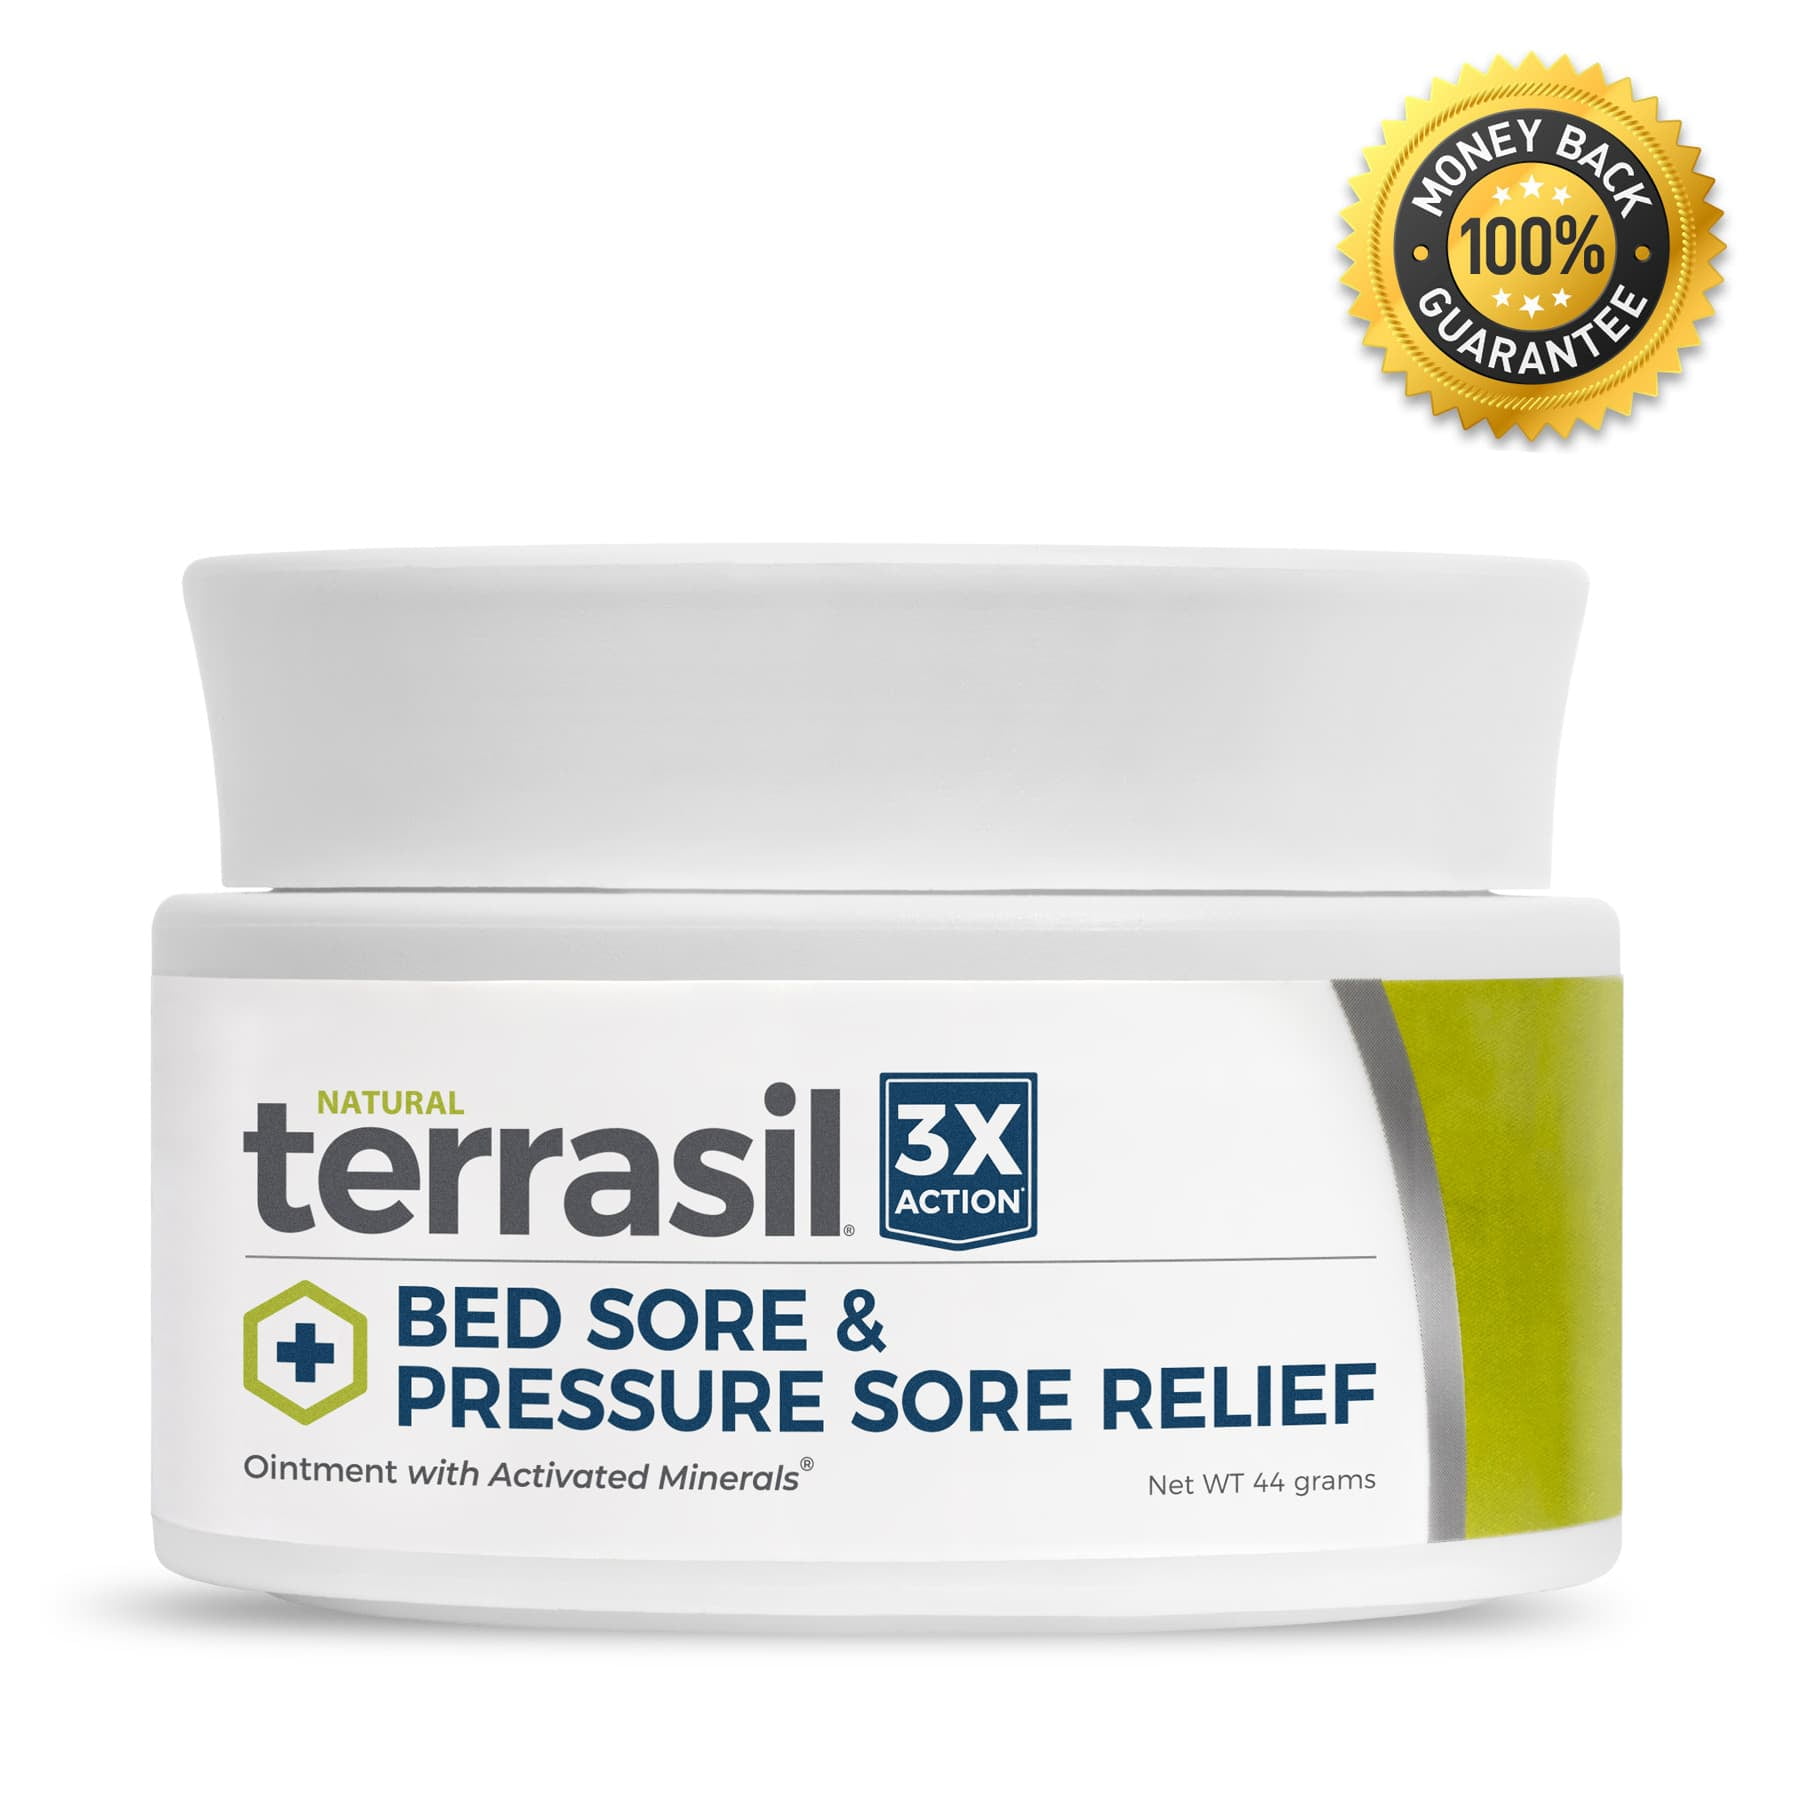 Bed Sores Cream By Terrasil For Natural Treatment Of Bed Sores